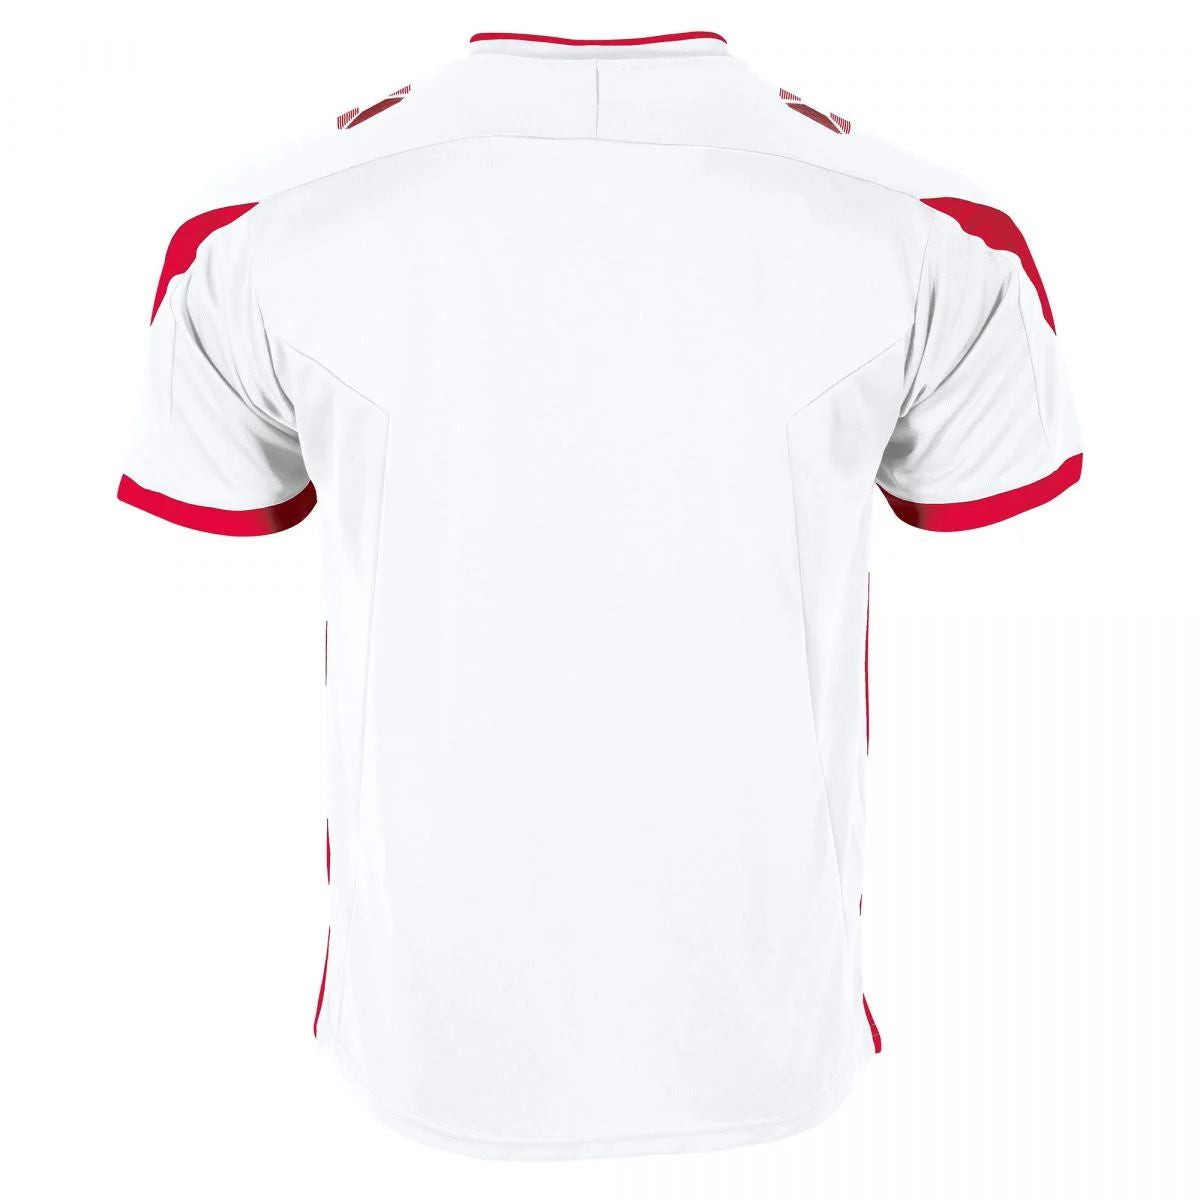 Stanno - Drive Shirt- White & Red